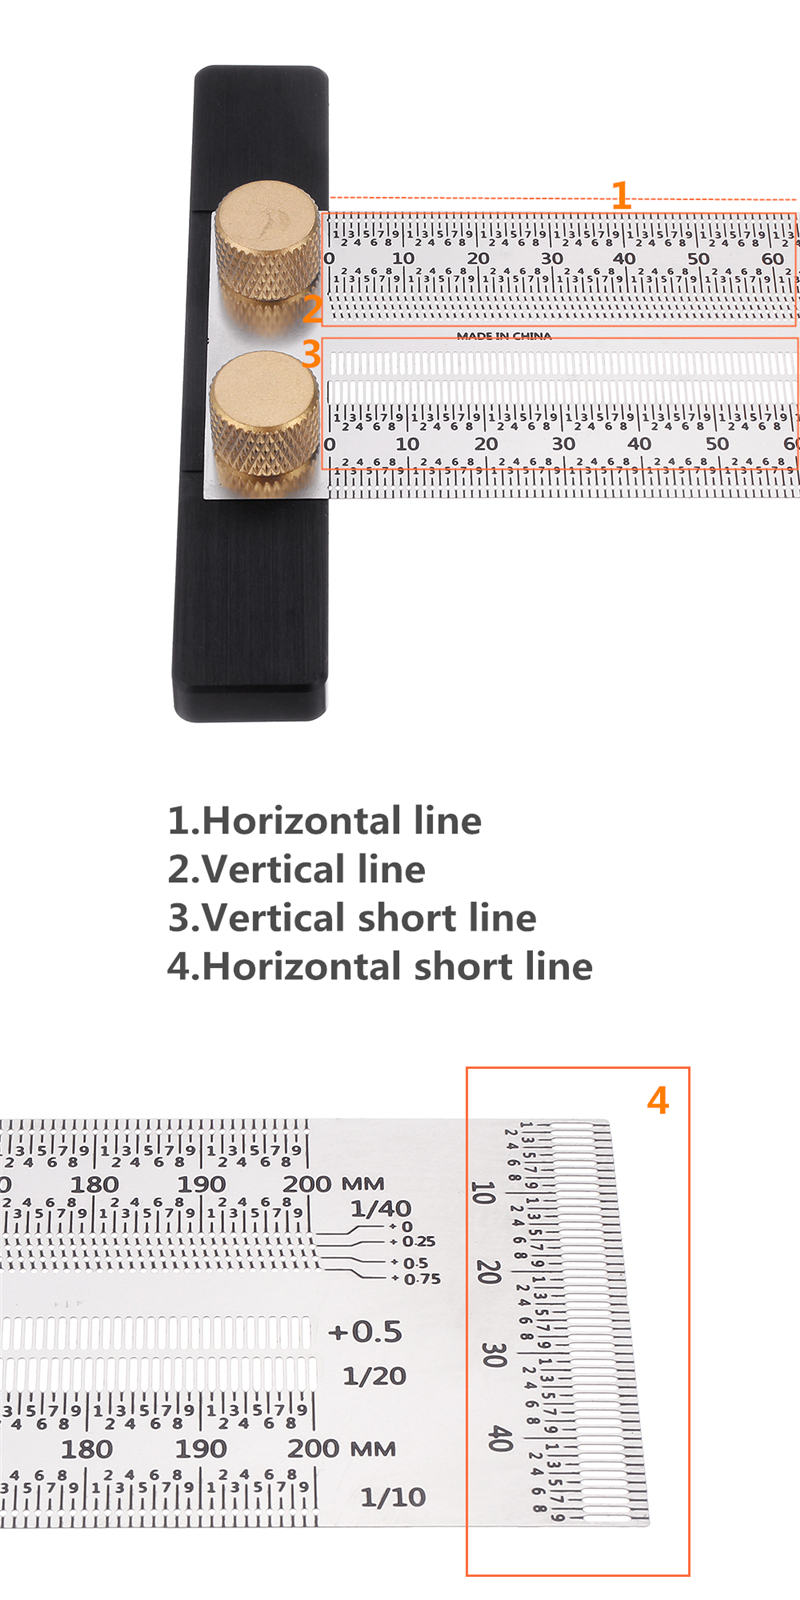 Drillpro-200300400mm-Stainless-Steel-Precision-Marking-T-Ruler-Hole-Positioning-Measuring-Ruler-Wood-1601316-5